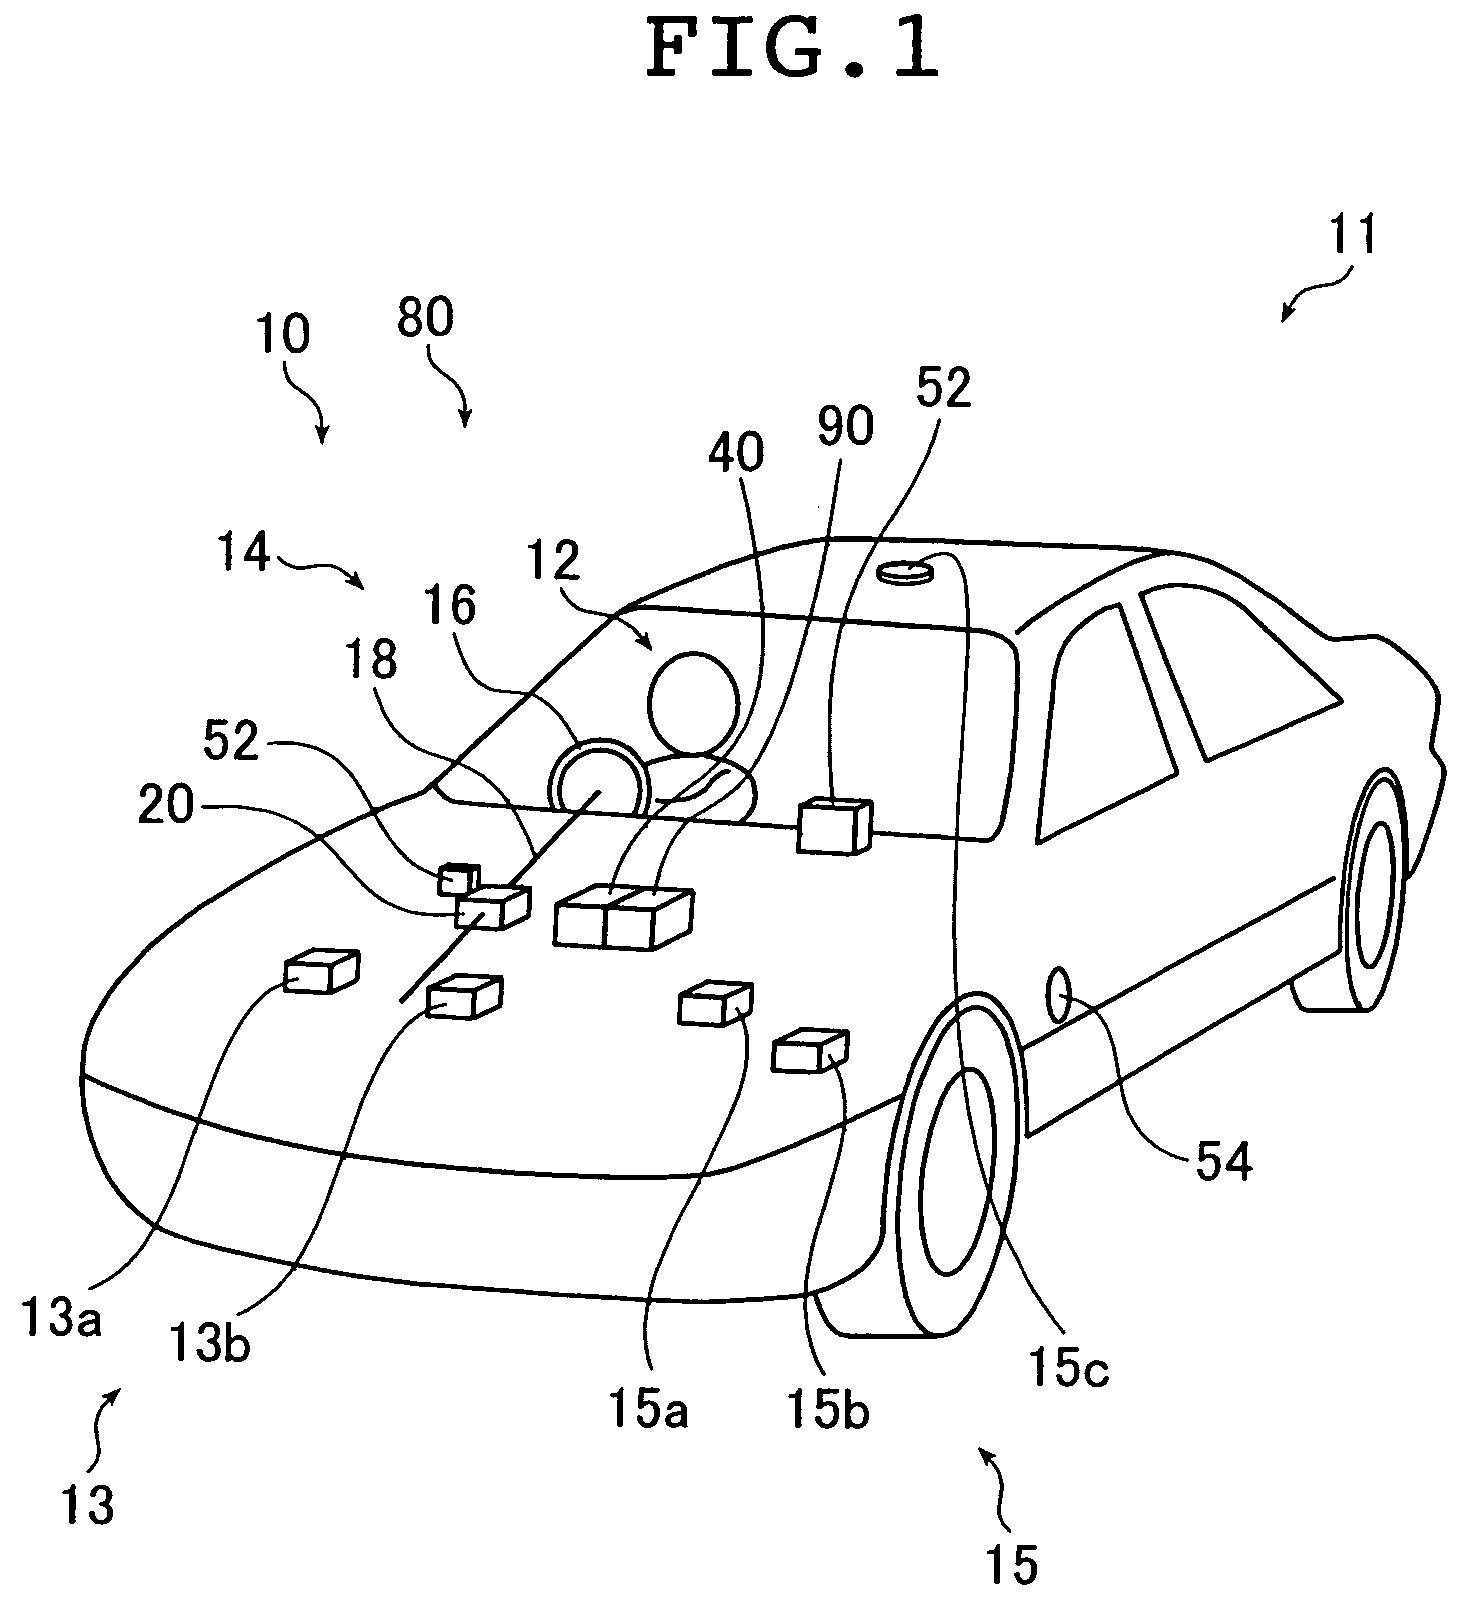 Apparatus and method for evaluating driving skill and apparatus and method for informing efficiency of driver's physical load to driving operation